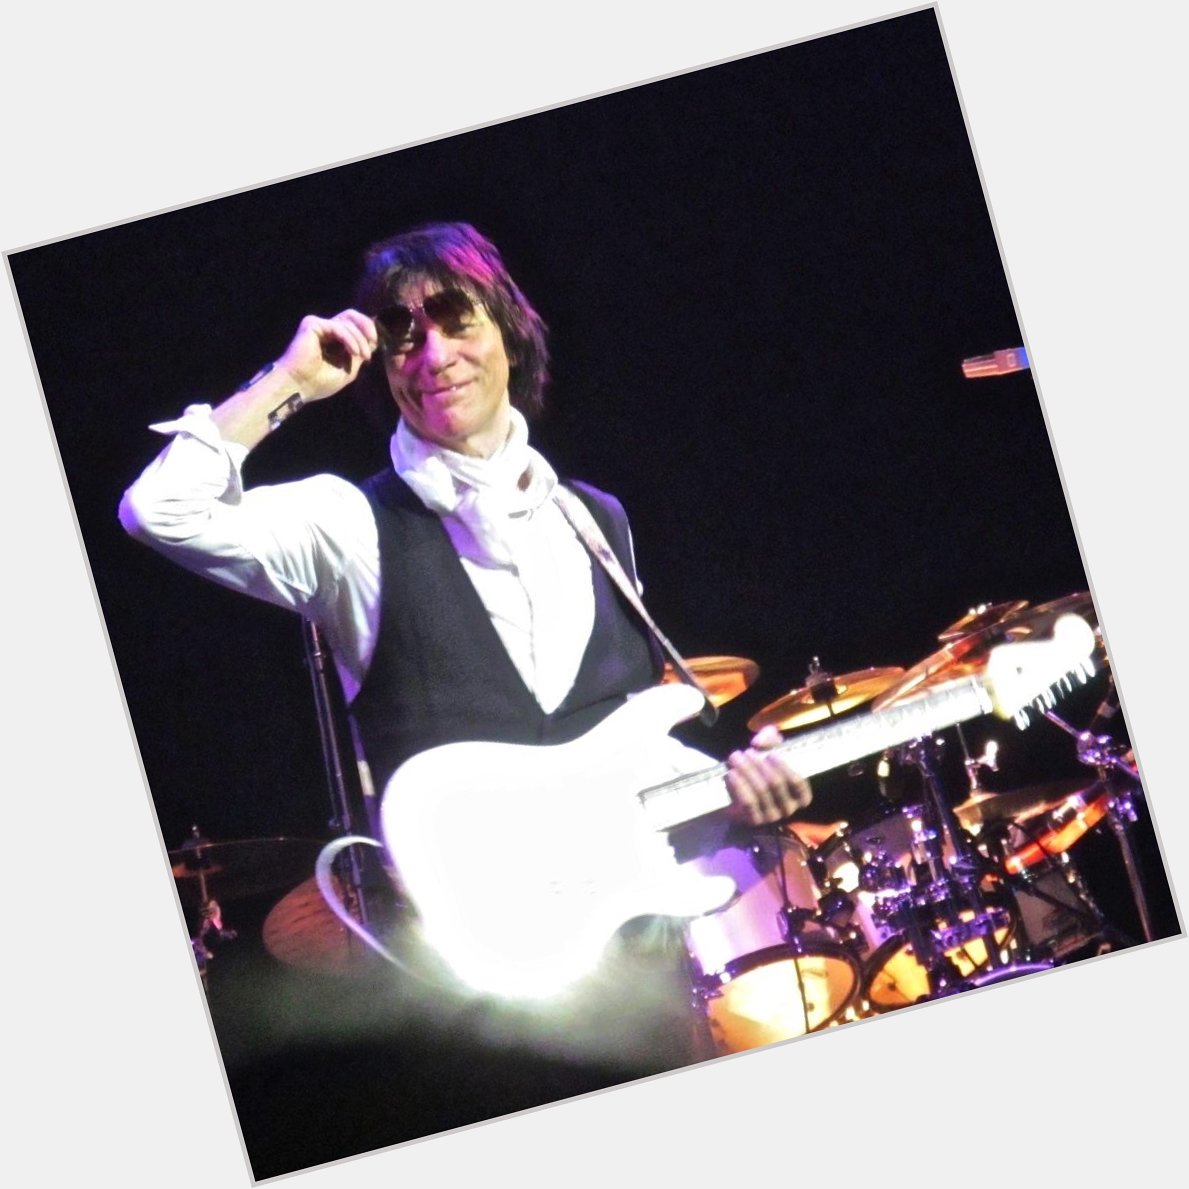 Happy Birthday Mr. Jeff Beck! Fred took this photo. Thank you for the music, Jeff! 